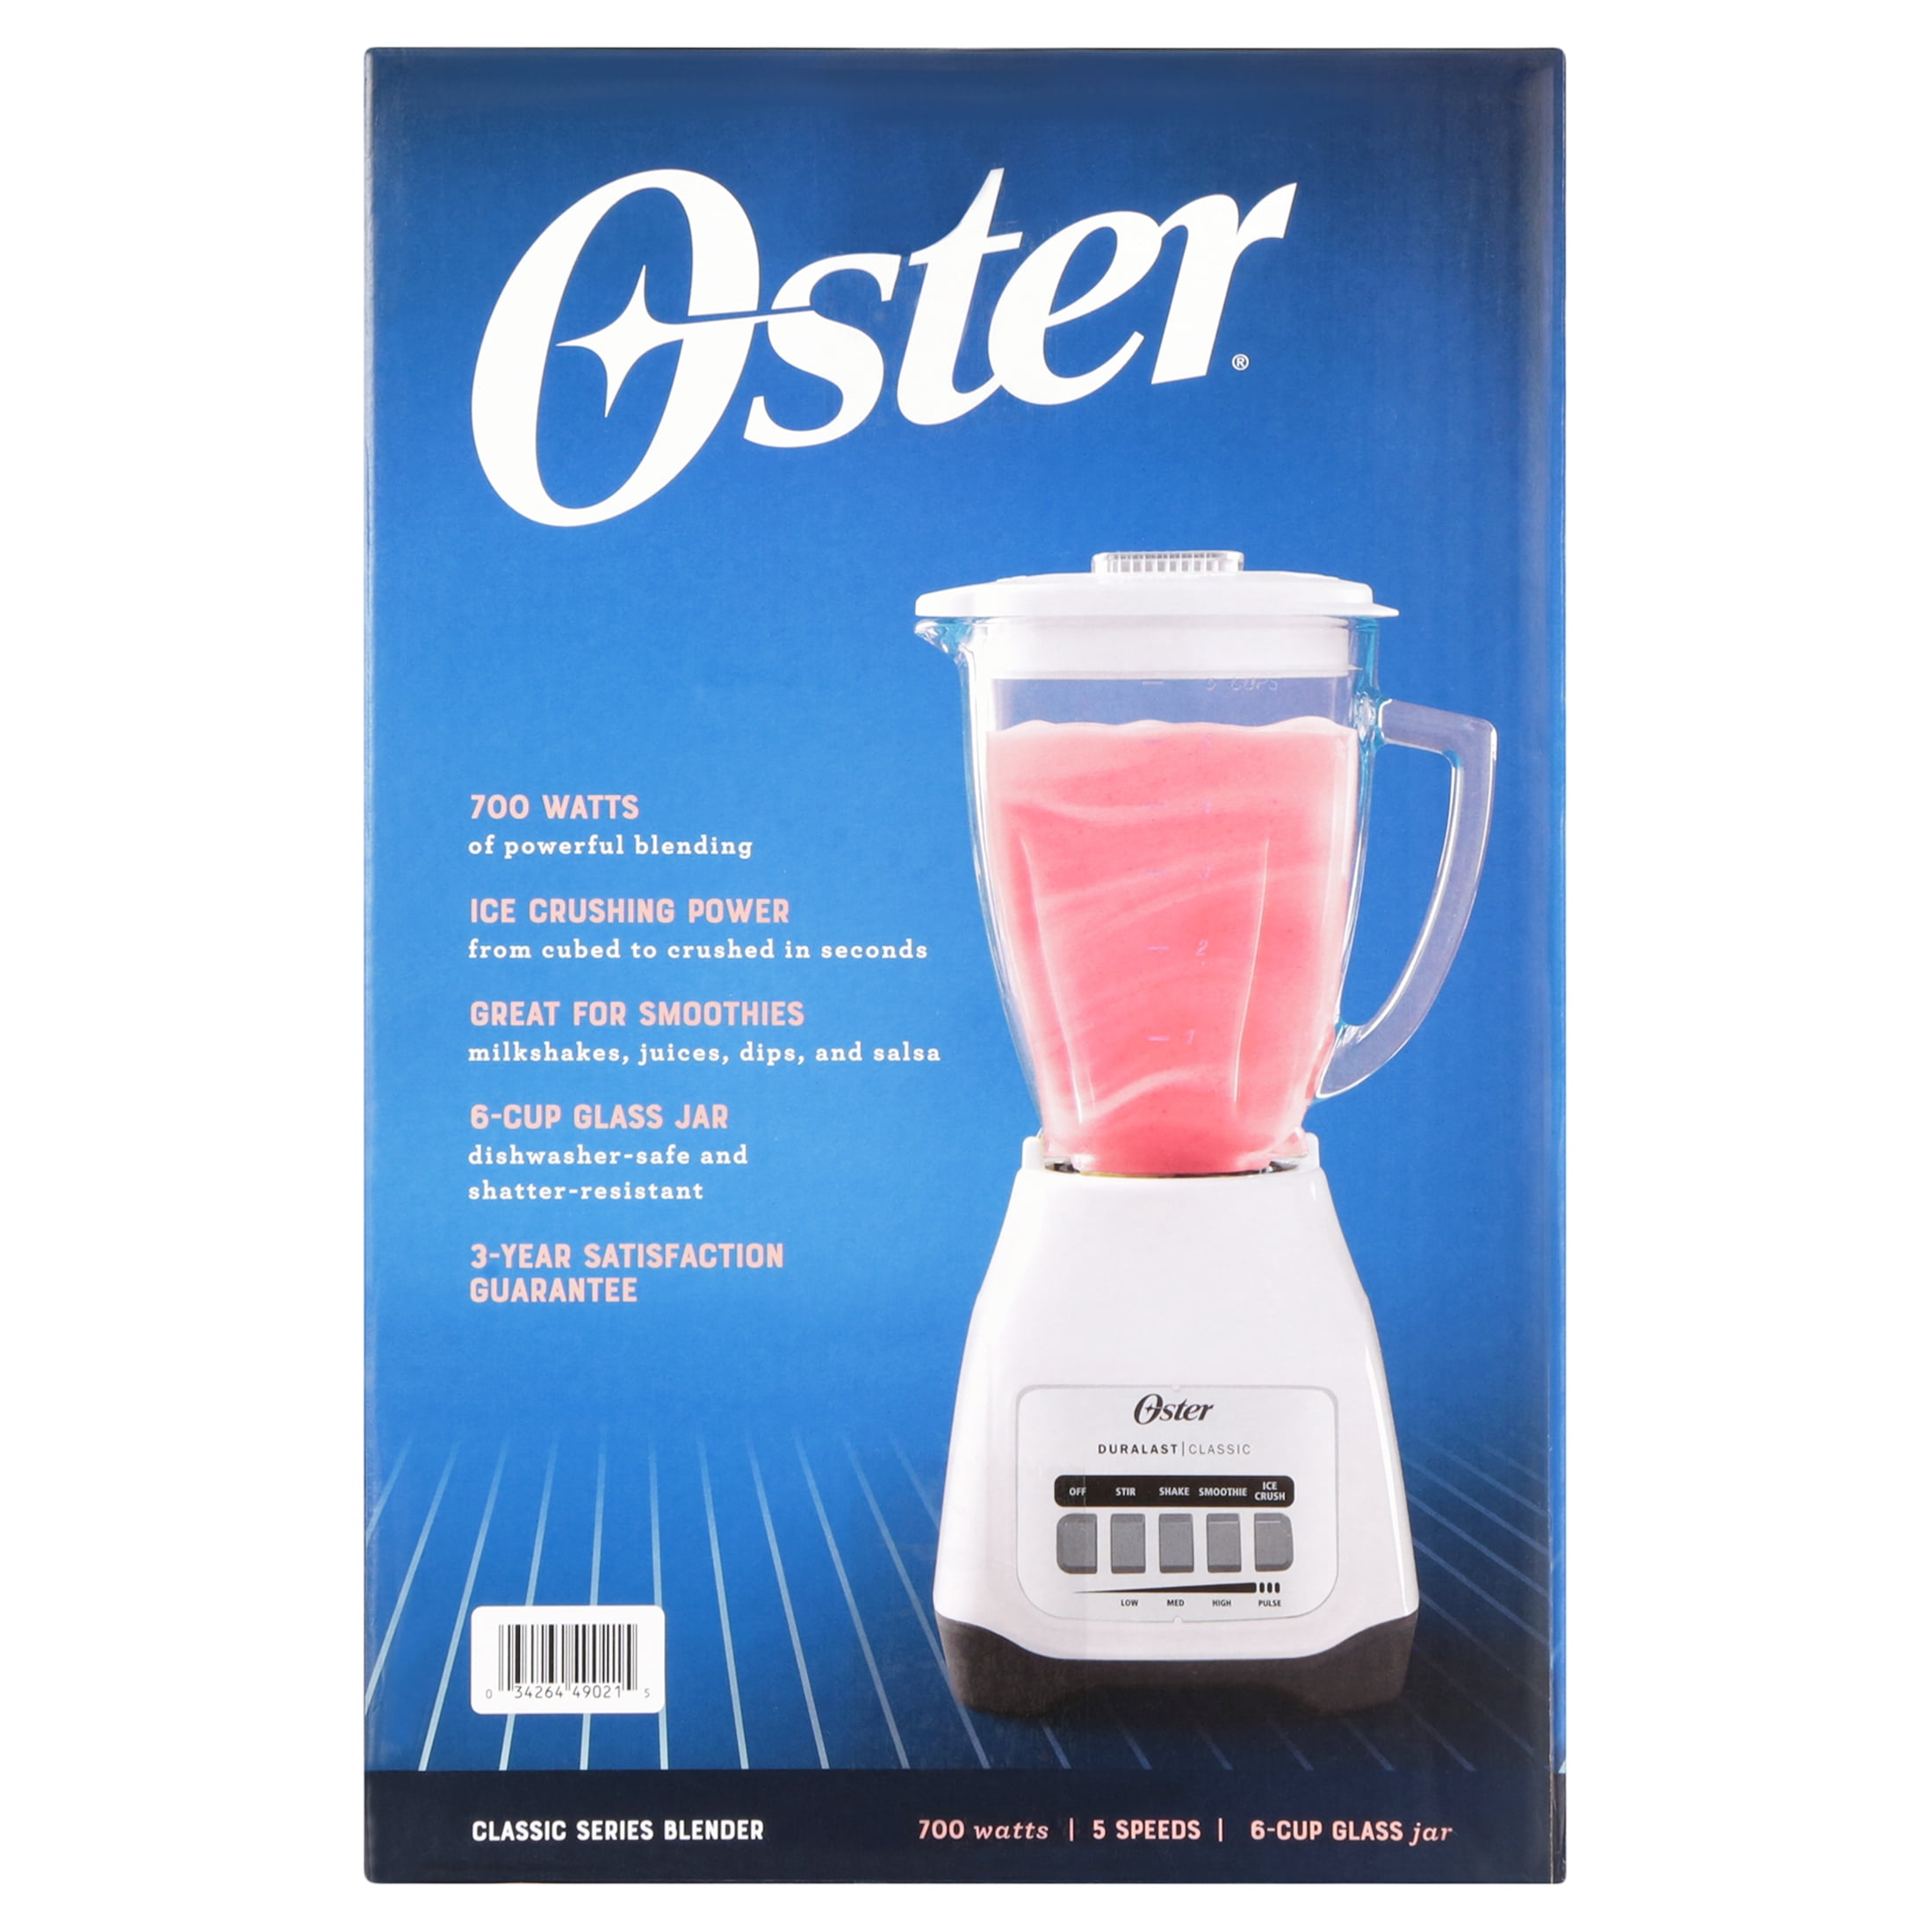 Oster Classic Series Blender with Travel Smoothie Cup - Red BLSTCG 